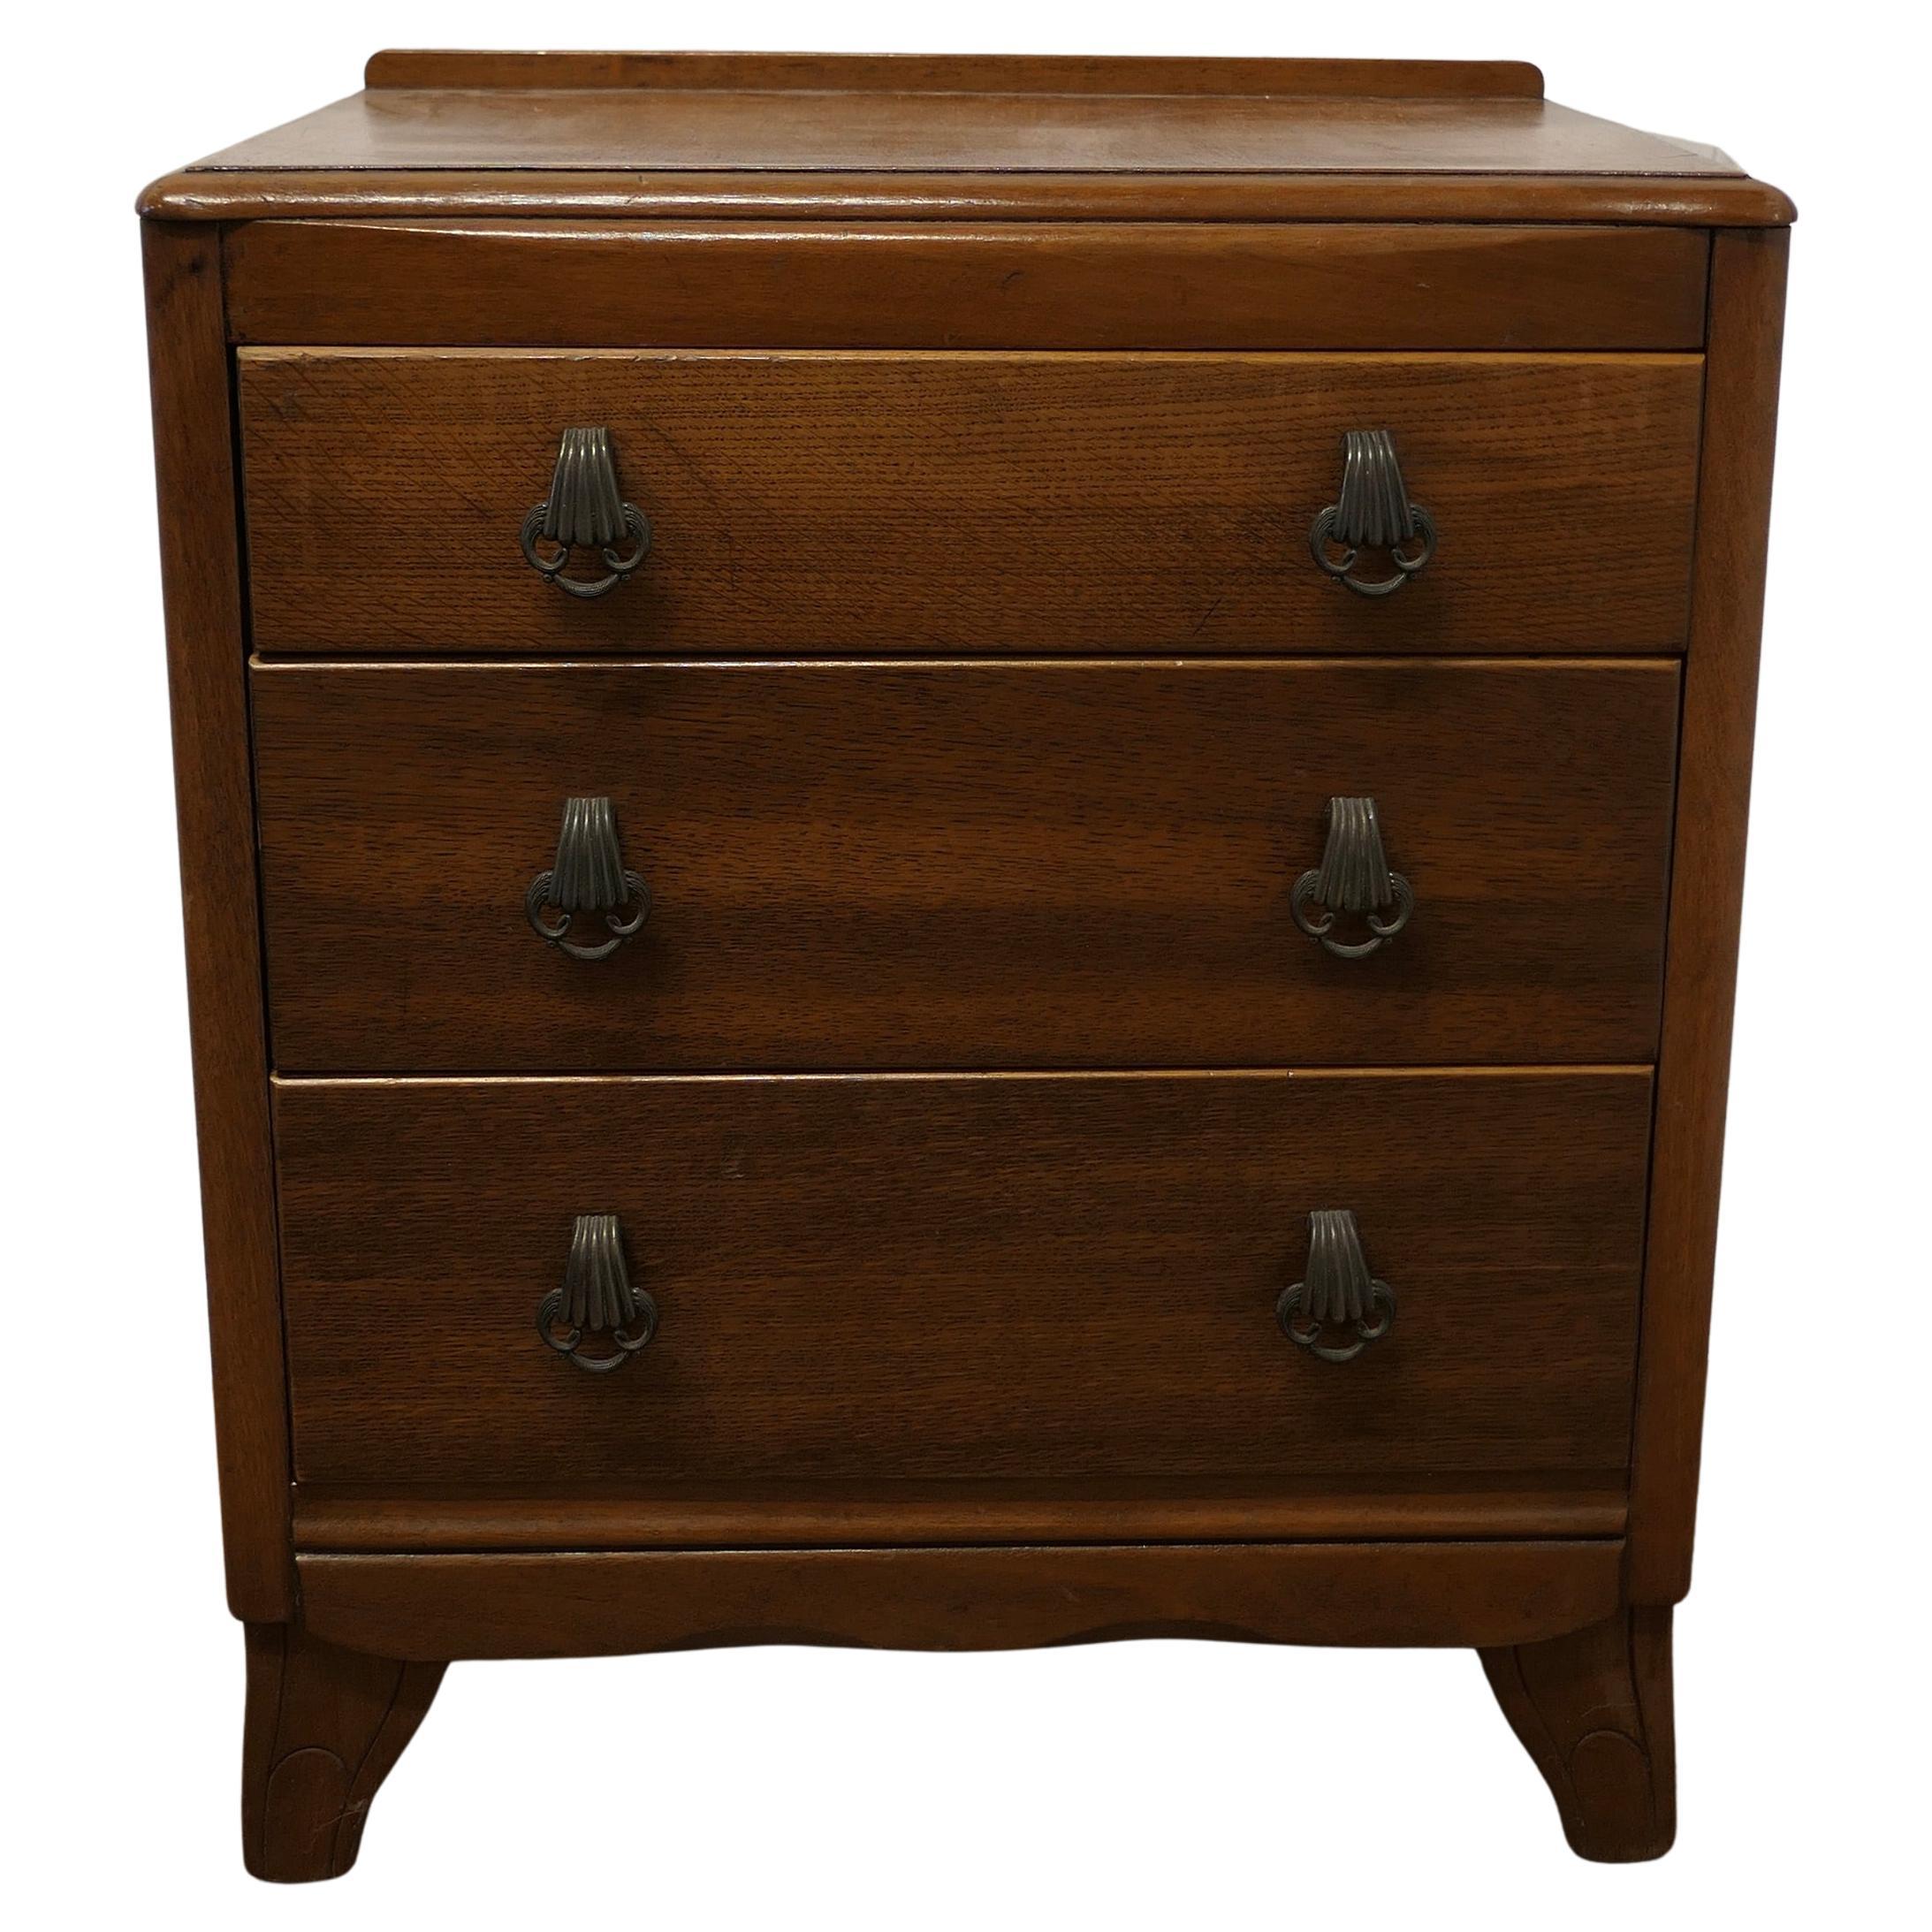 Art Deco Golden Oak Chest of Drawers by Lebus This Is a Classic Piece